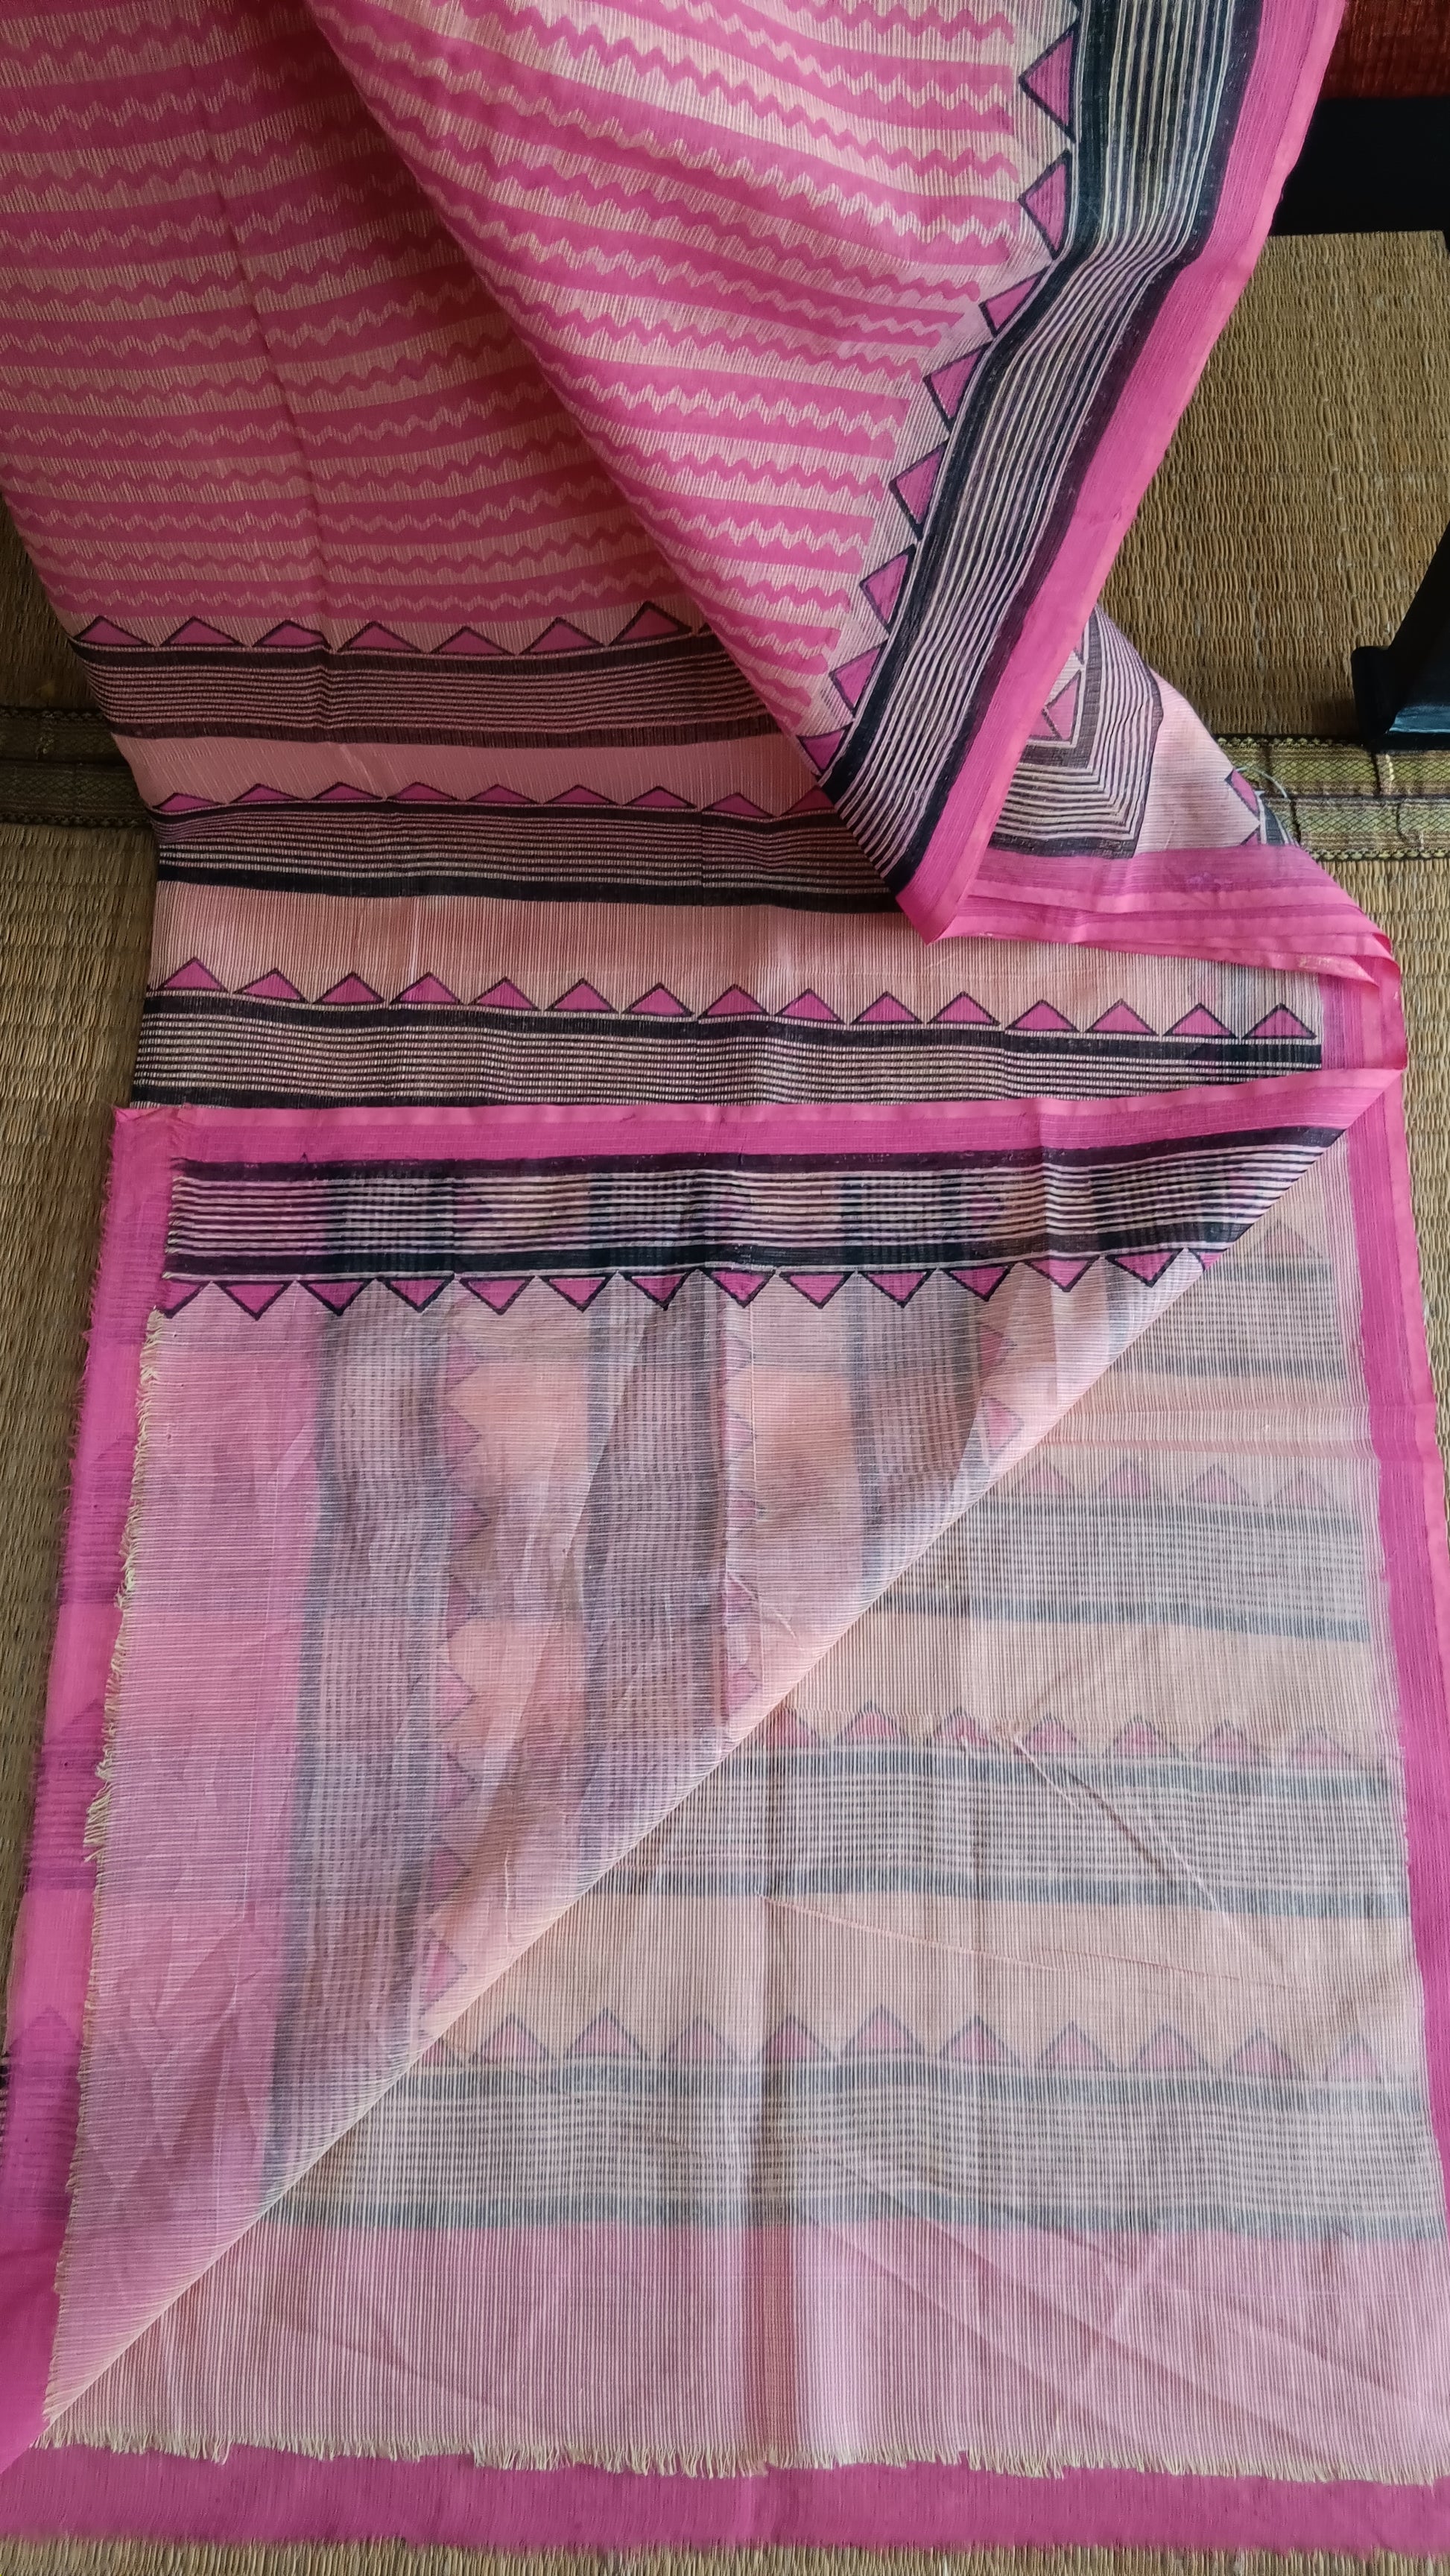 View from the top of the plain blouse of a daily use kota cotton saree